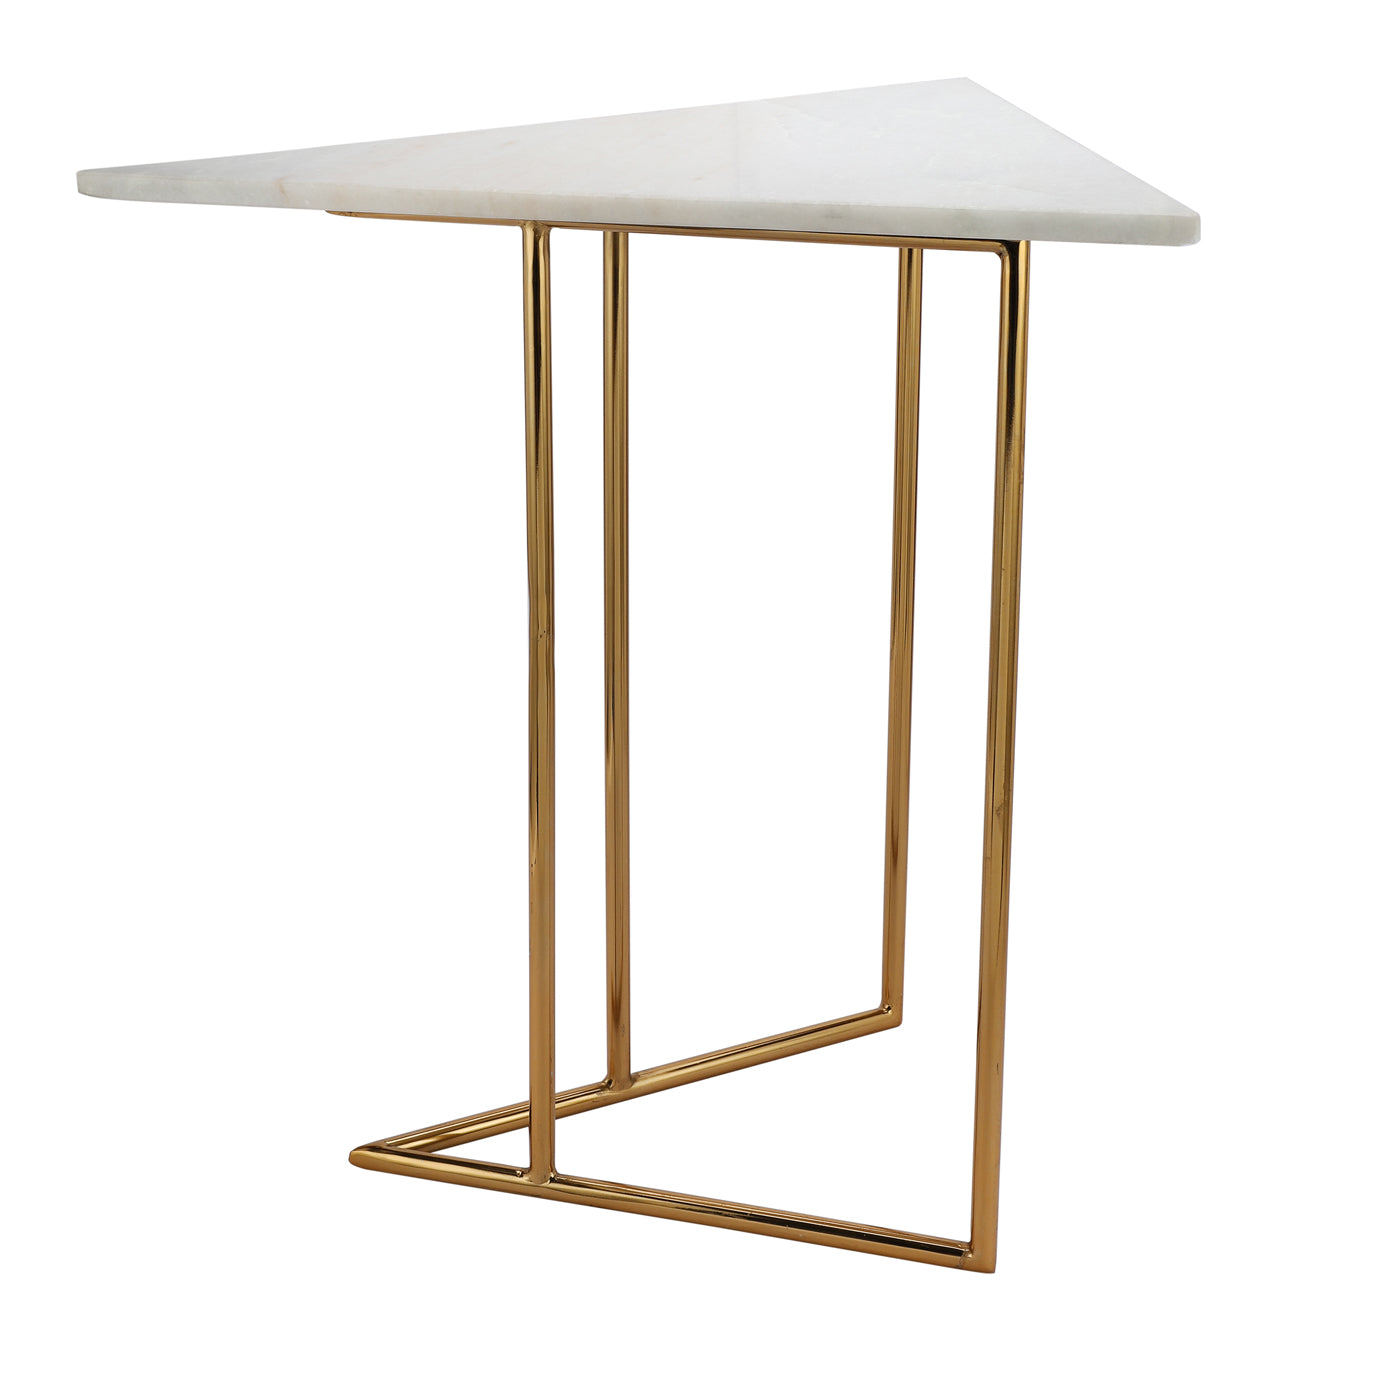 Marbled Steel Triangle Nesting Tables in shiny Gold Nickel Finish 2pcs set